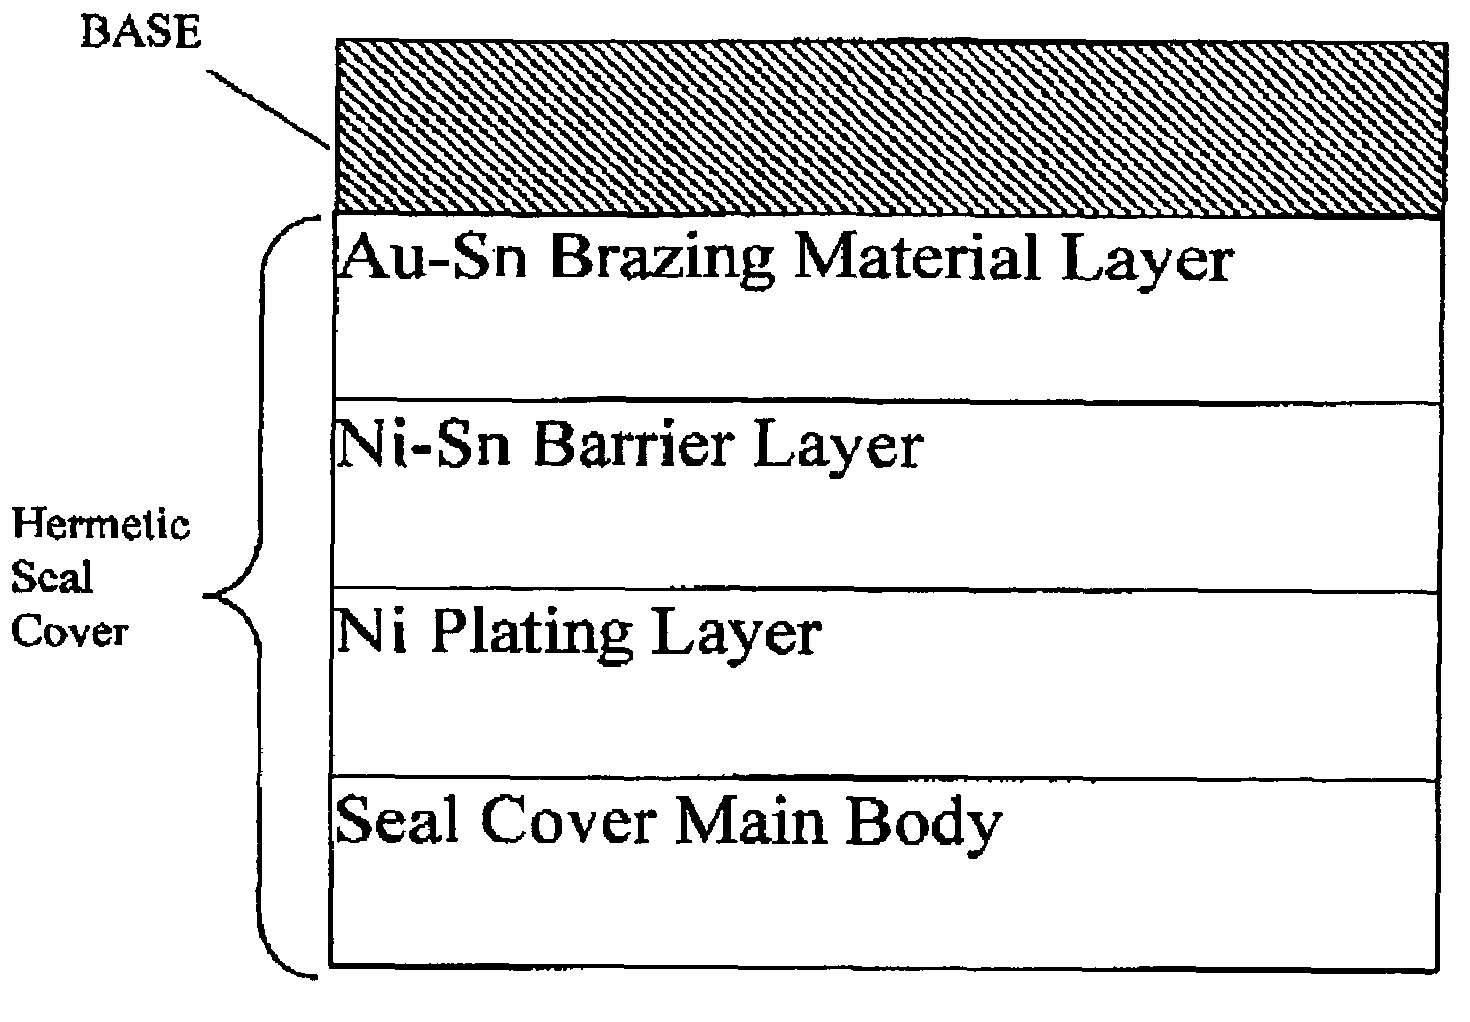 Seal cover structure comprising a nickel-tin (Ni—Sn) alloy barrier layer formed between a nickel (Ni) plating layer and a gold-tin (Au—Sn) brazing layer having Sn content of 20.65 to 25 WT % formed on the seal cover main body